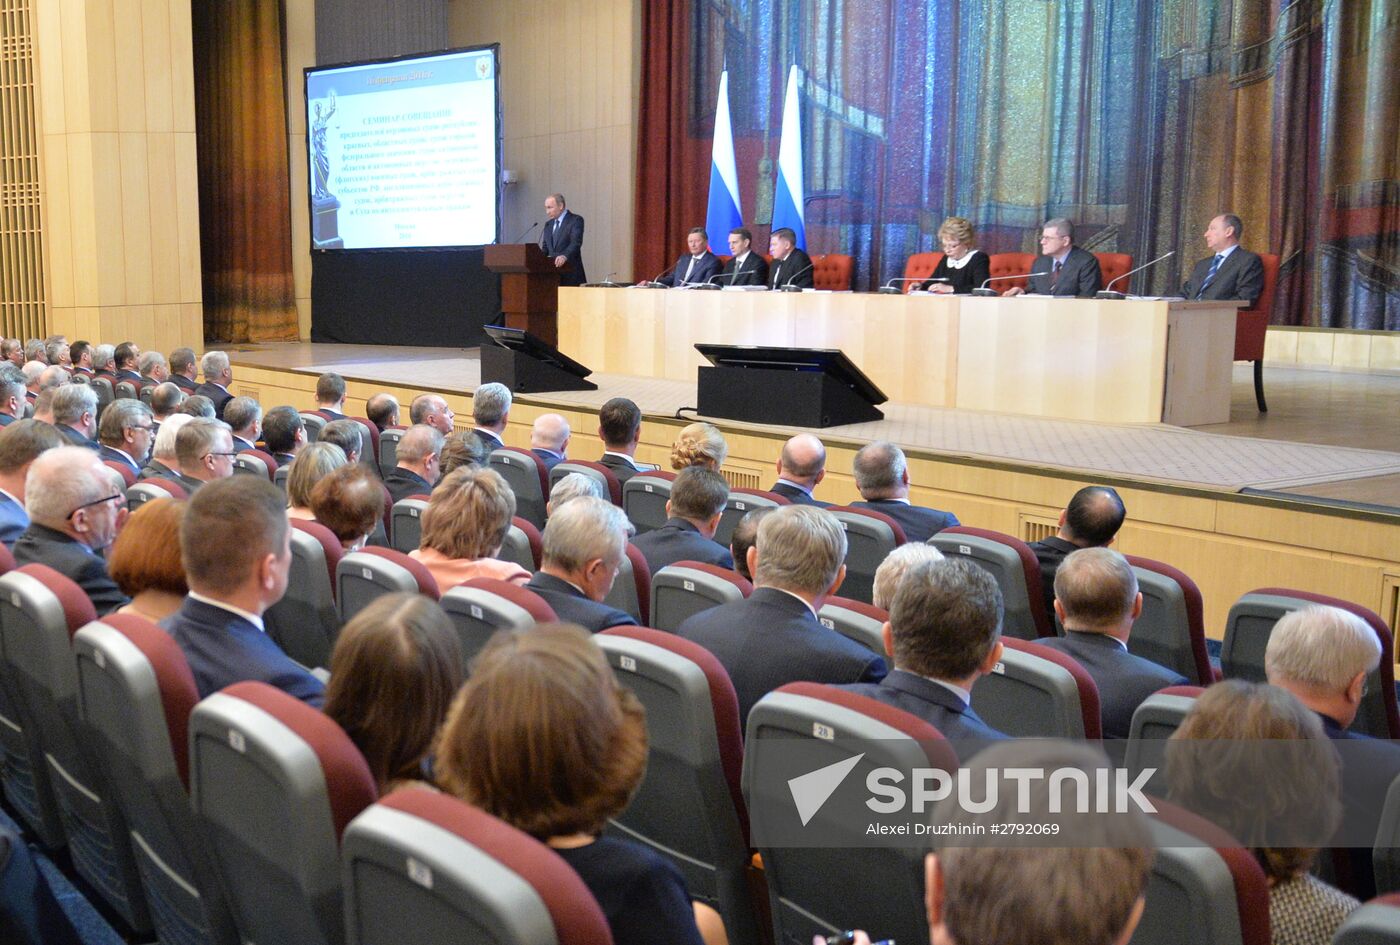 Russian President Vladimir Putin attends national meeting of court chairpersons